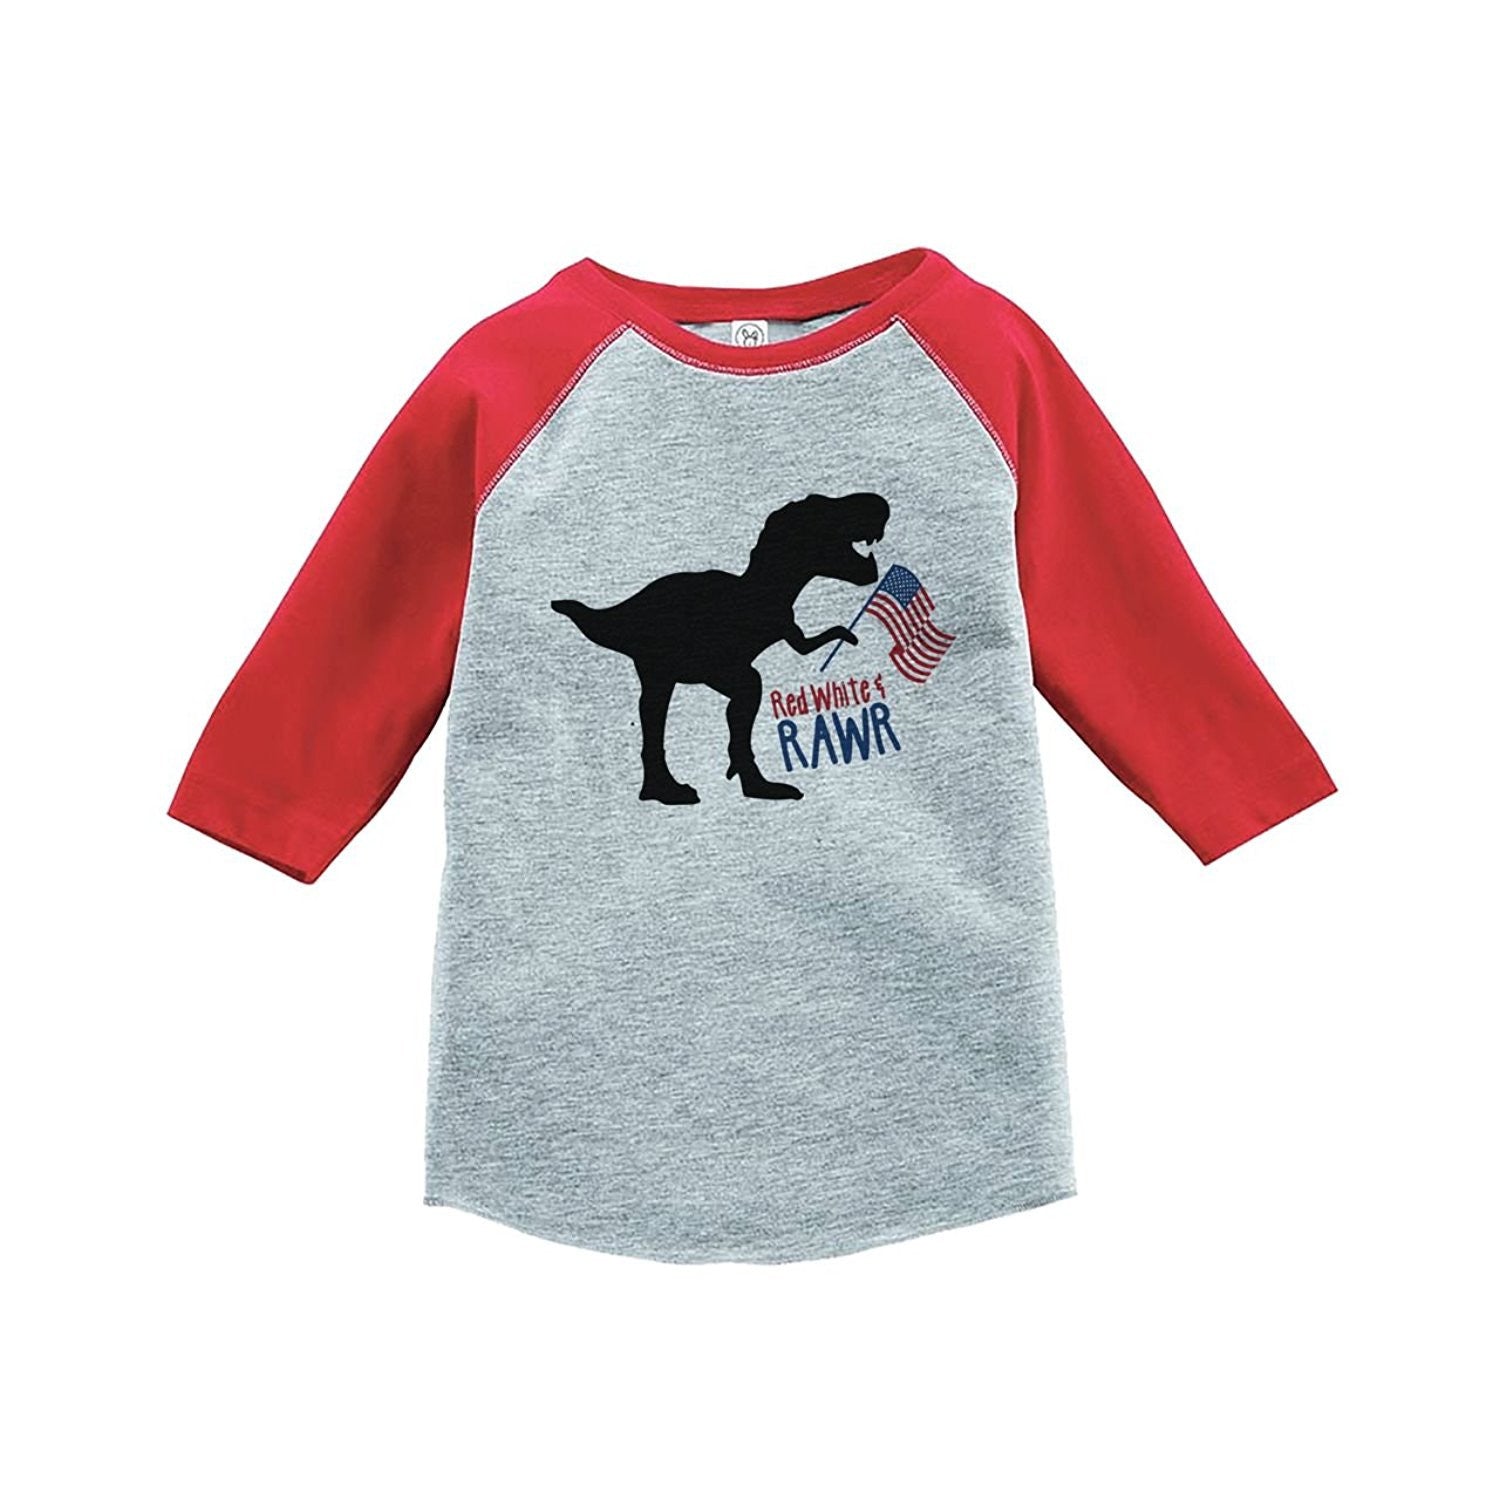 7 ate 9 Apparel Youth Dinosaur 4th of July Red Baseball Tee 5T